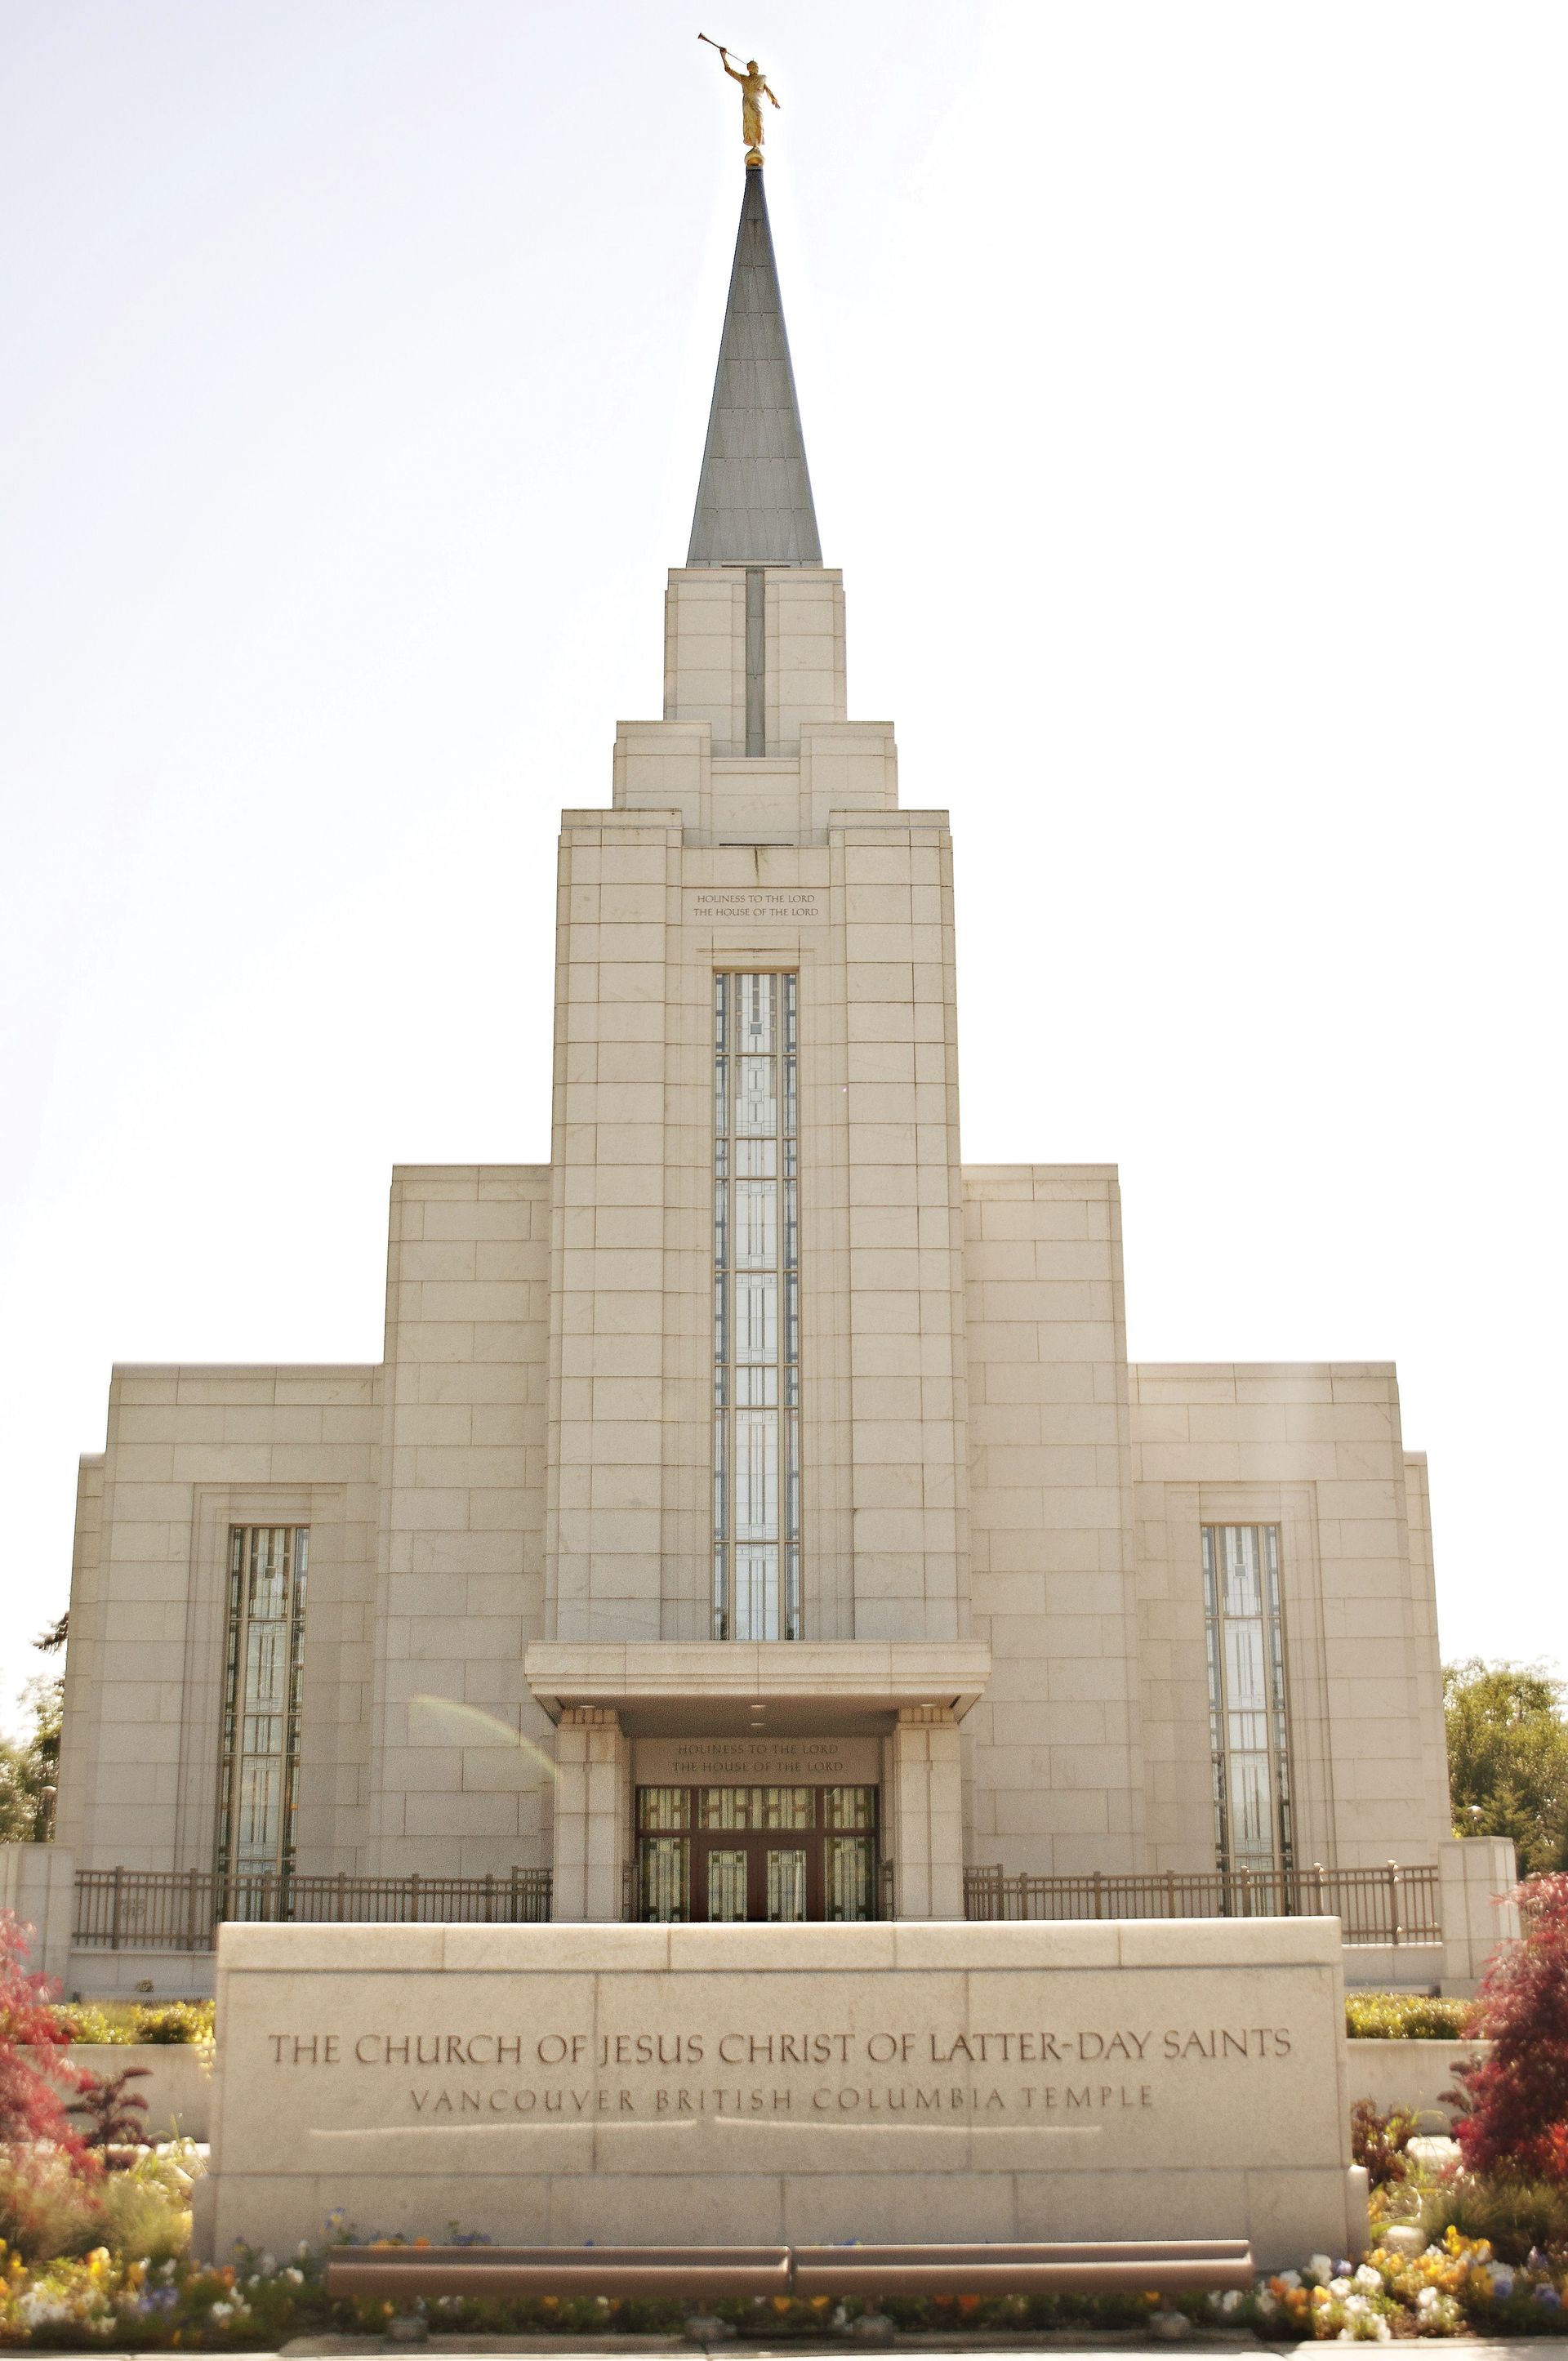 The entire Vancouver British Columbia Temple, with the name sign, entrance, windows, and spire.